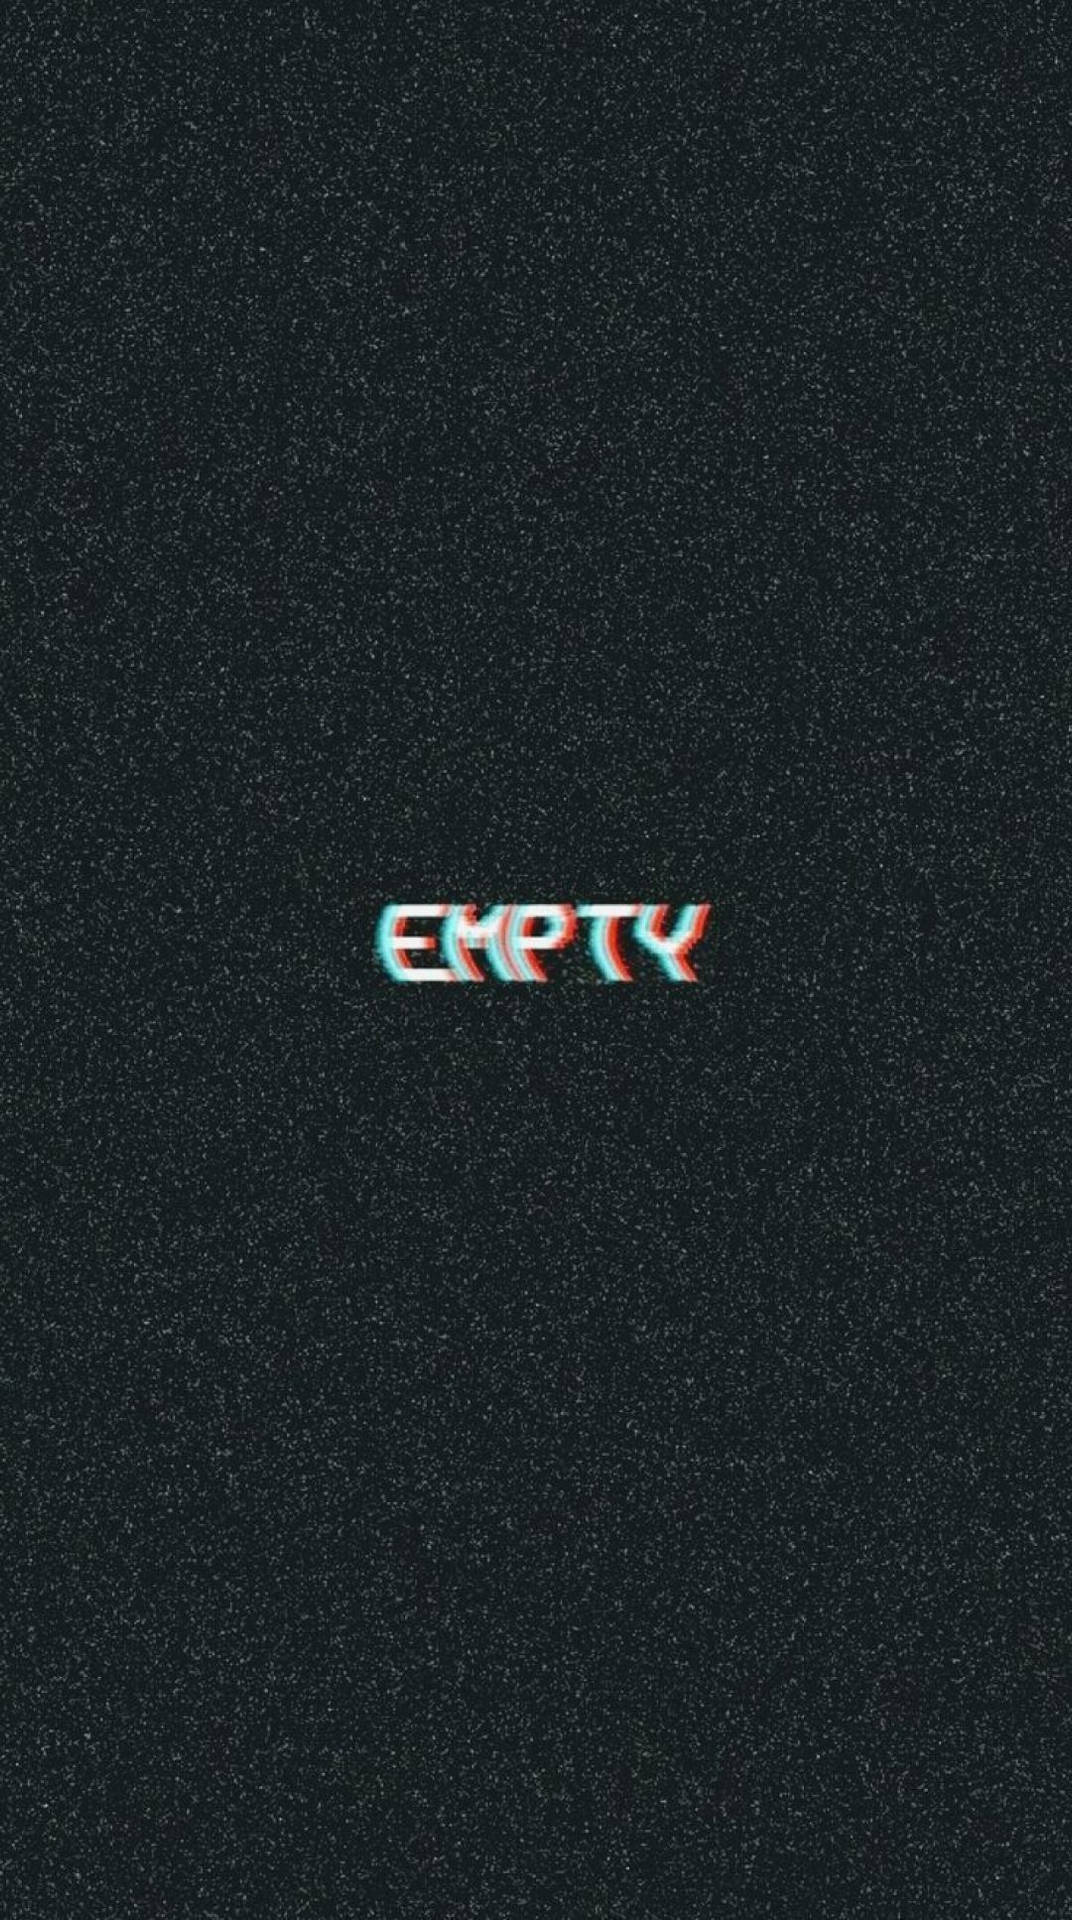 The logo for a new company called epity - Dark phone